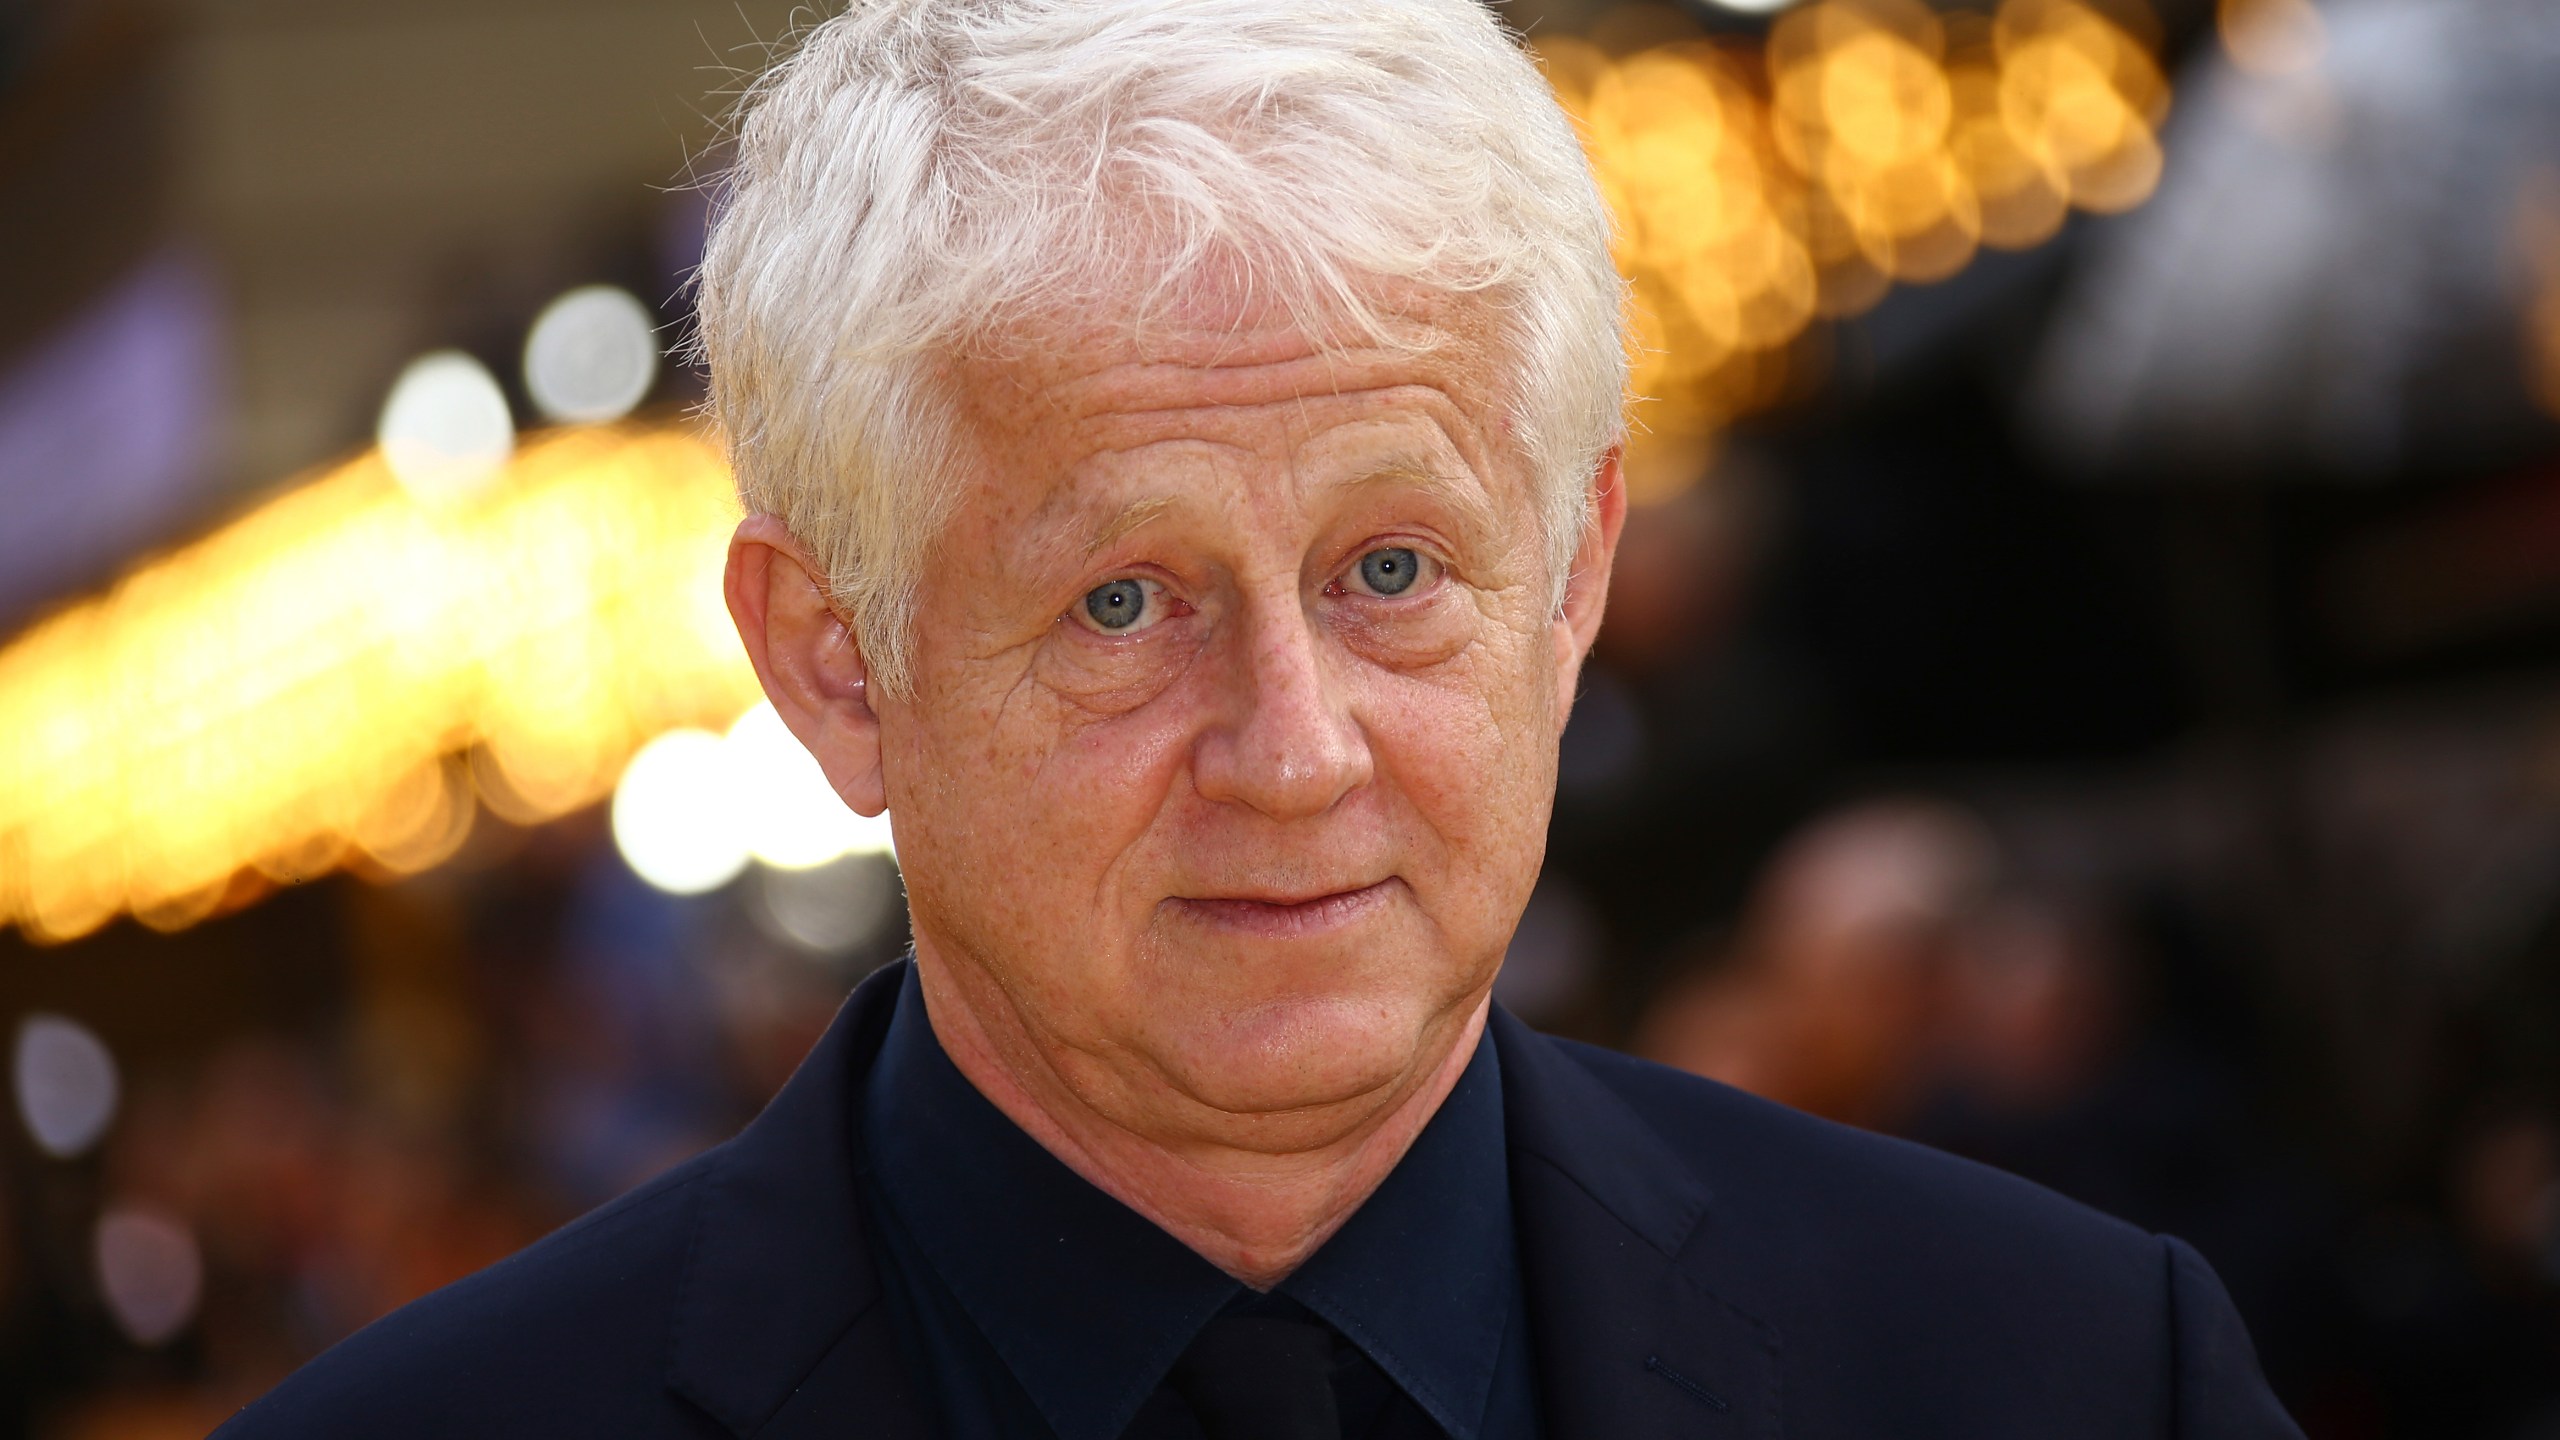 FILE - Richard Curtis poses for photographers upon arrival at the premiere for 'Yesterday' in London, Tuesday, June 18, 2019. Curtis will receive an honorary Oscar at the 15th annual Governors Awards in November. (Photo by Joel C Ryan/Invision/AP, File)